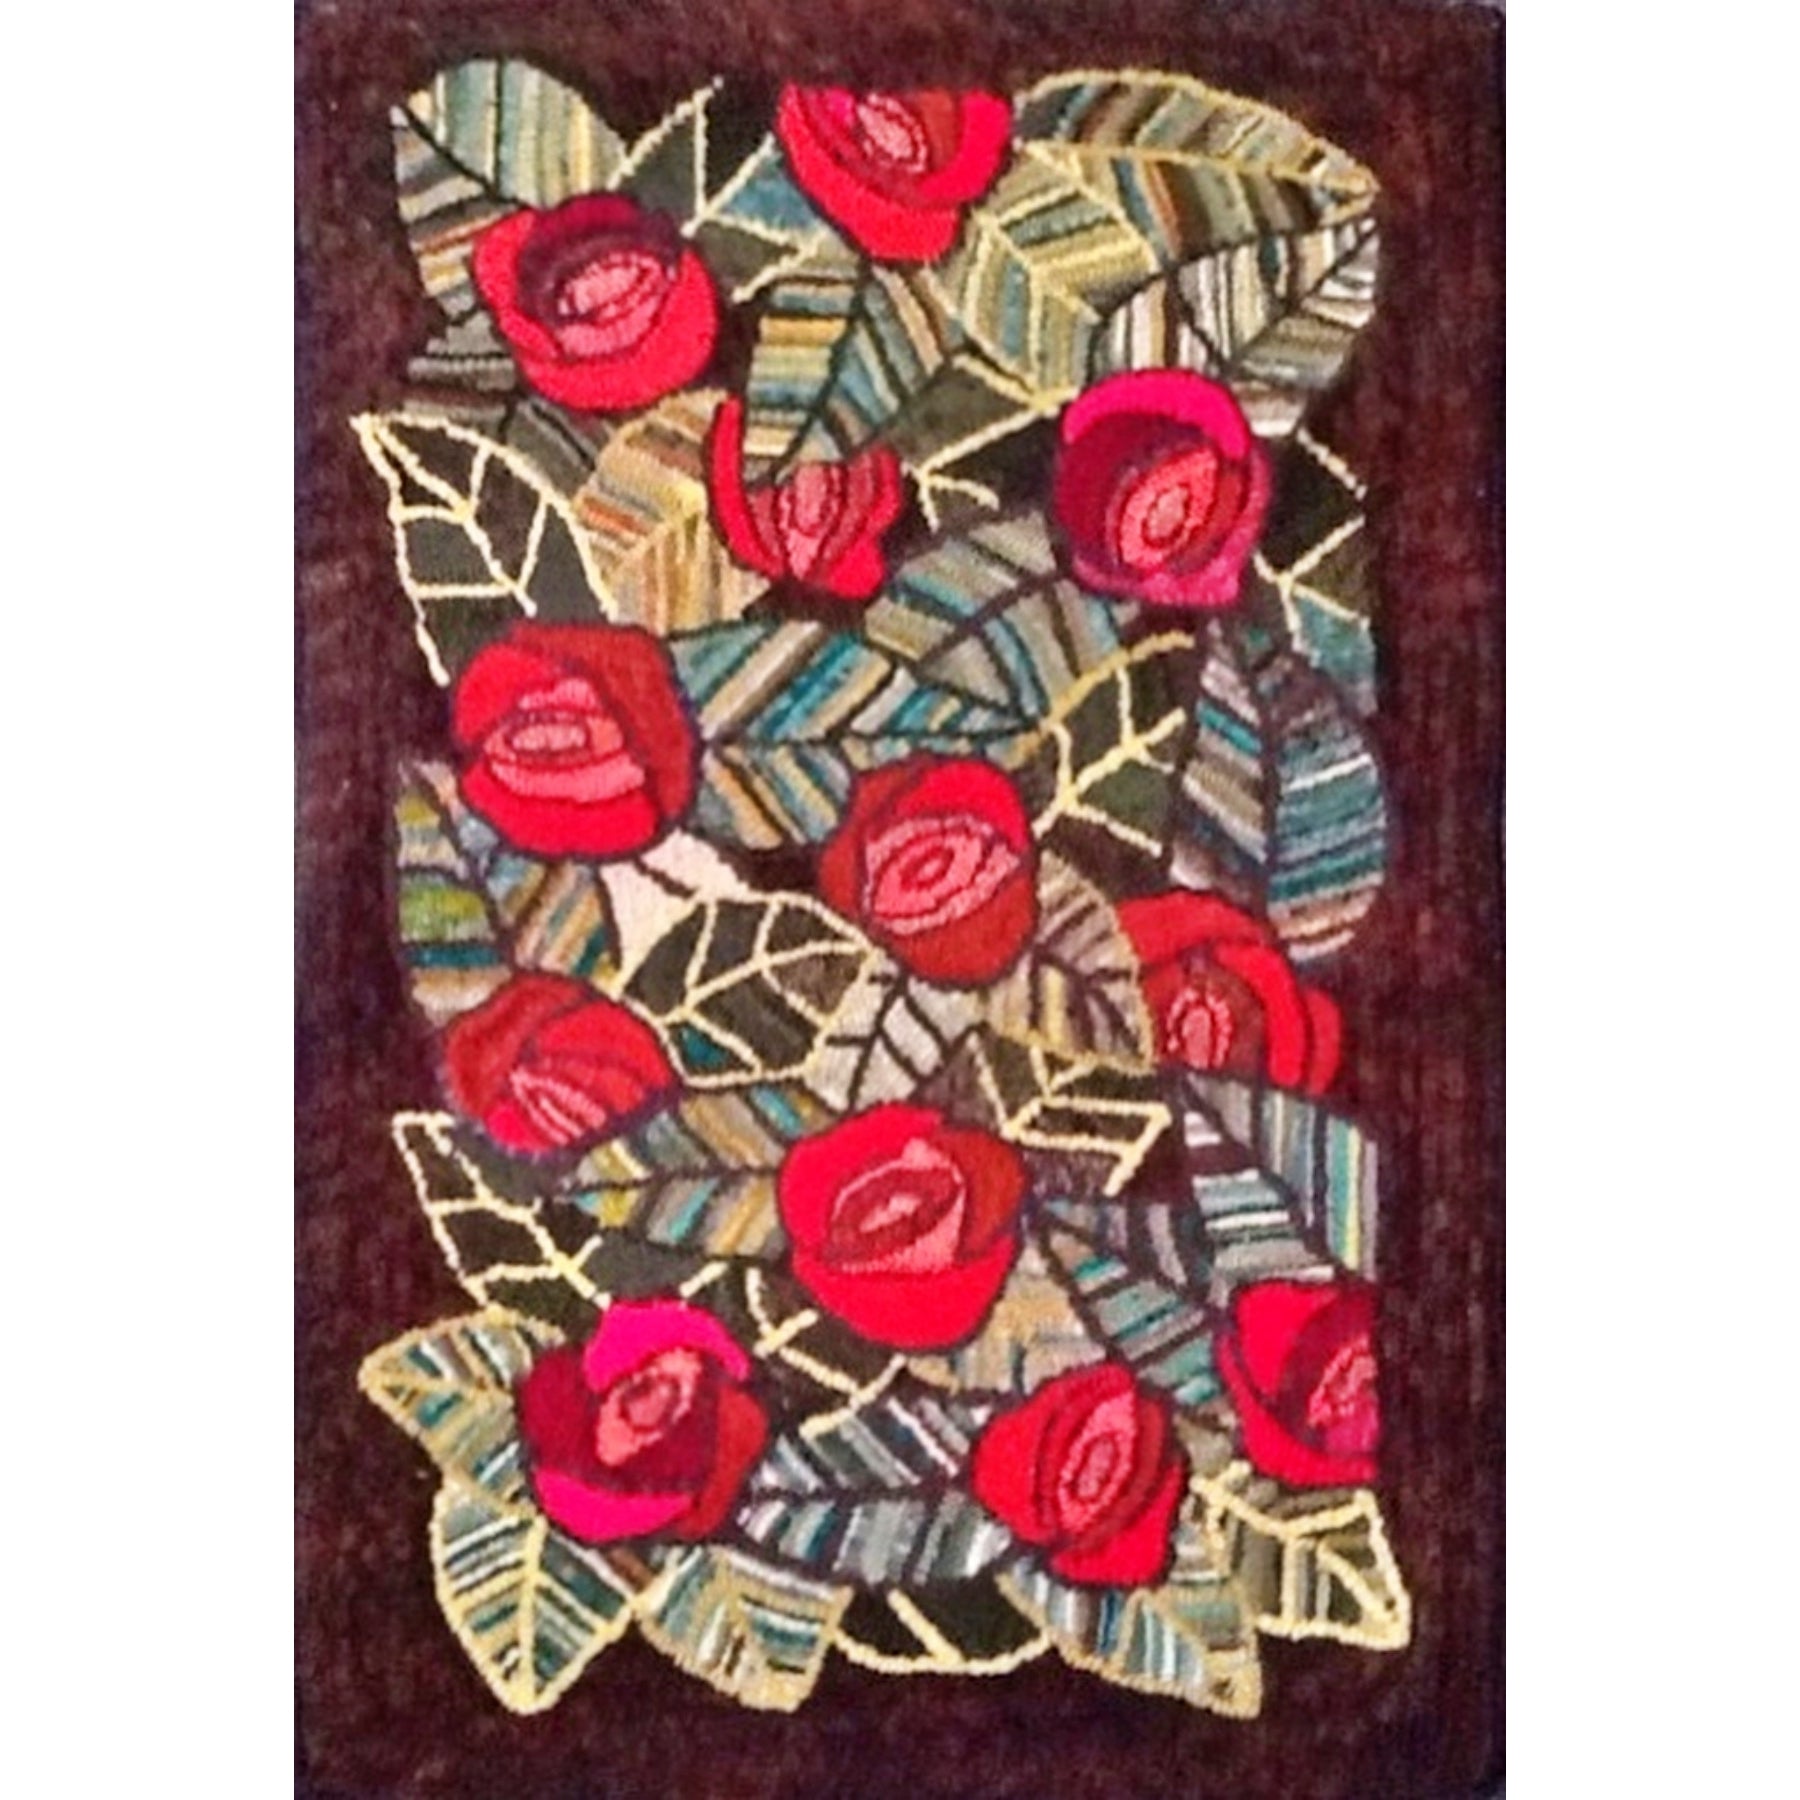 A Dozen Roses, rug hooked by Pam Schmelzle